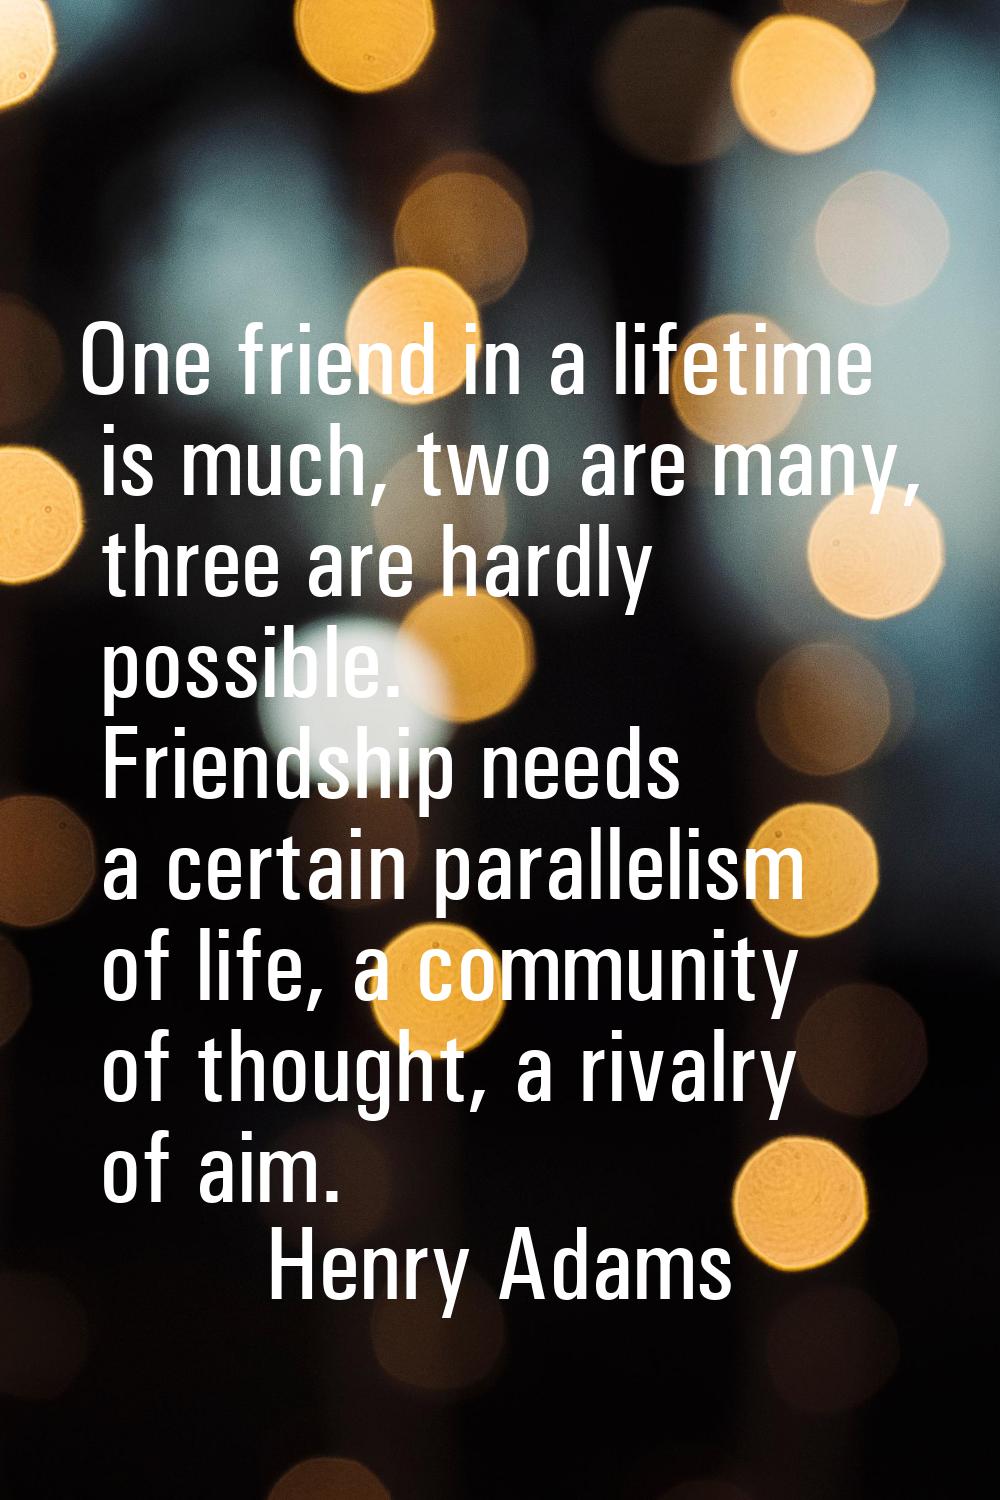 One friend in a lifetime is much, two are many, three are hardly possible. Friendship needs a certa